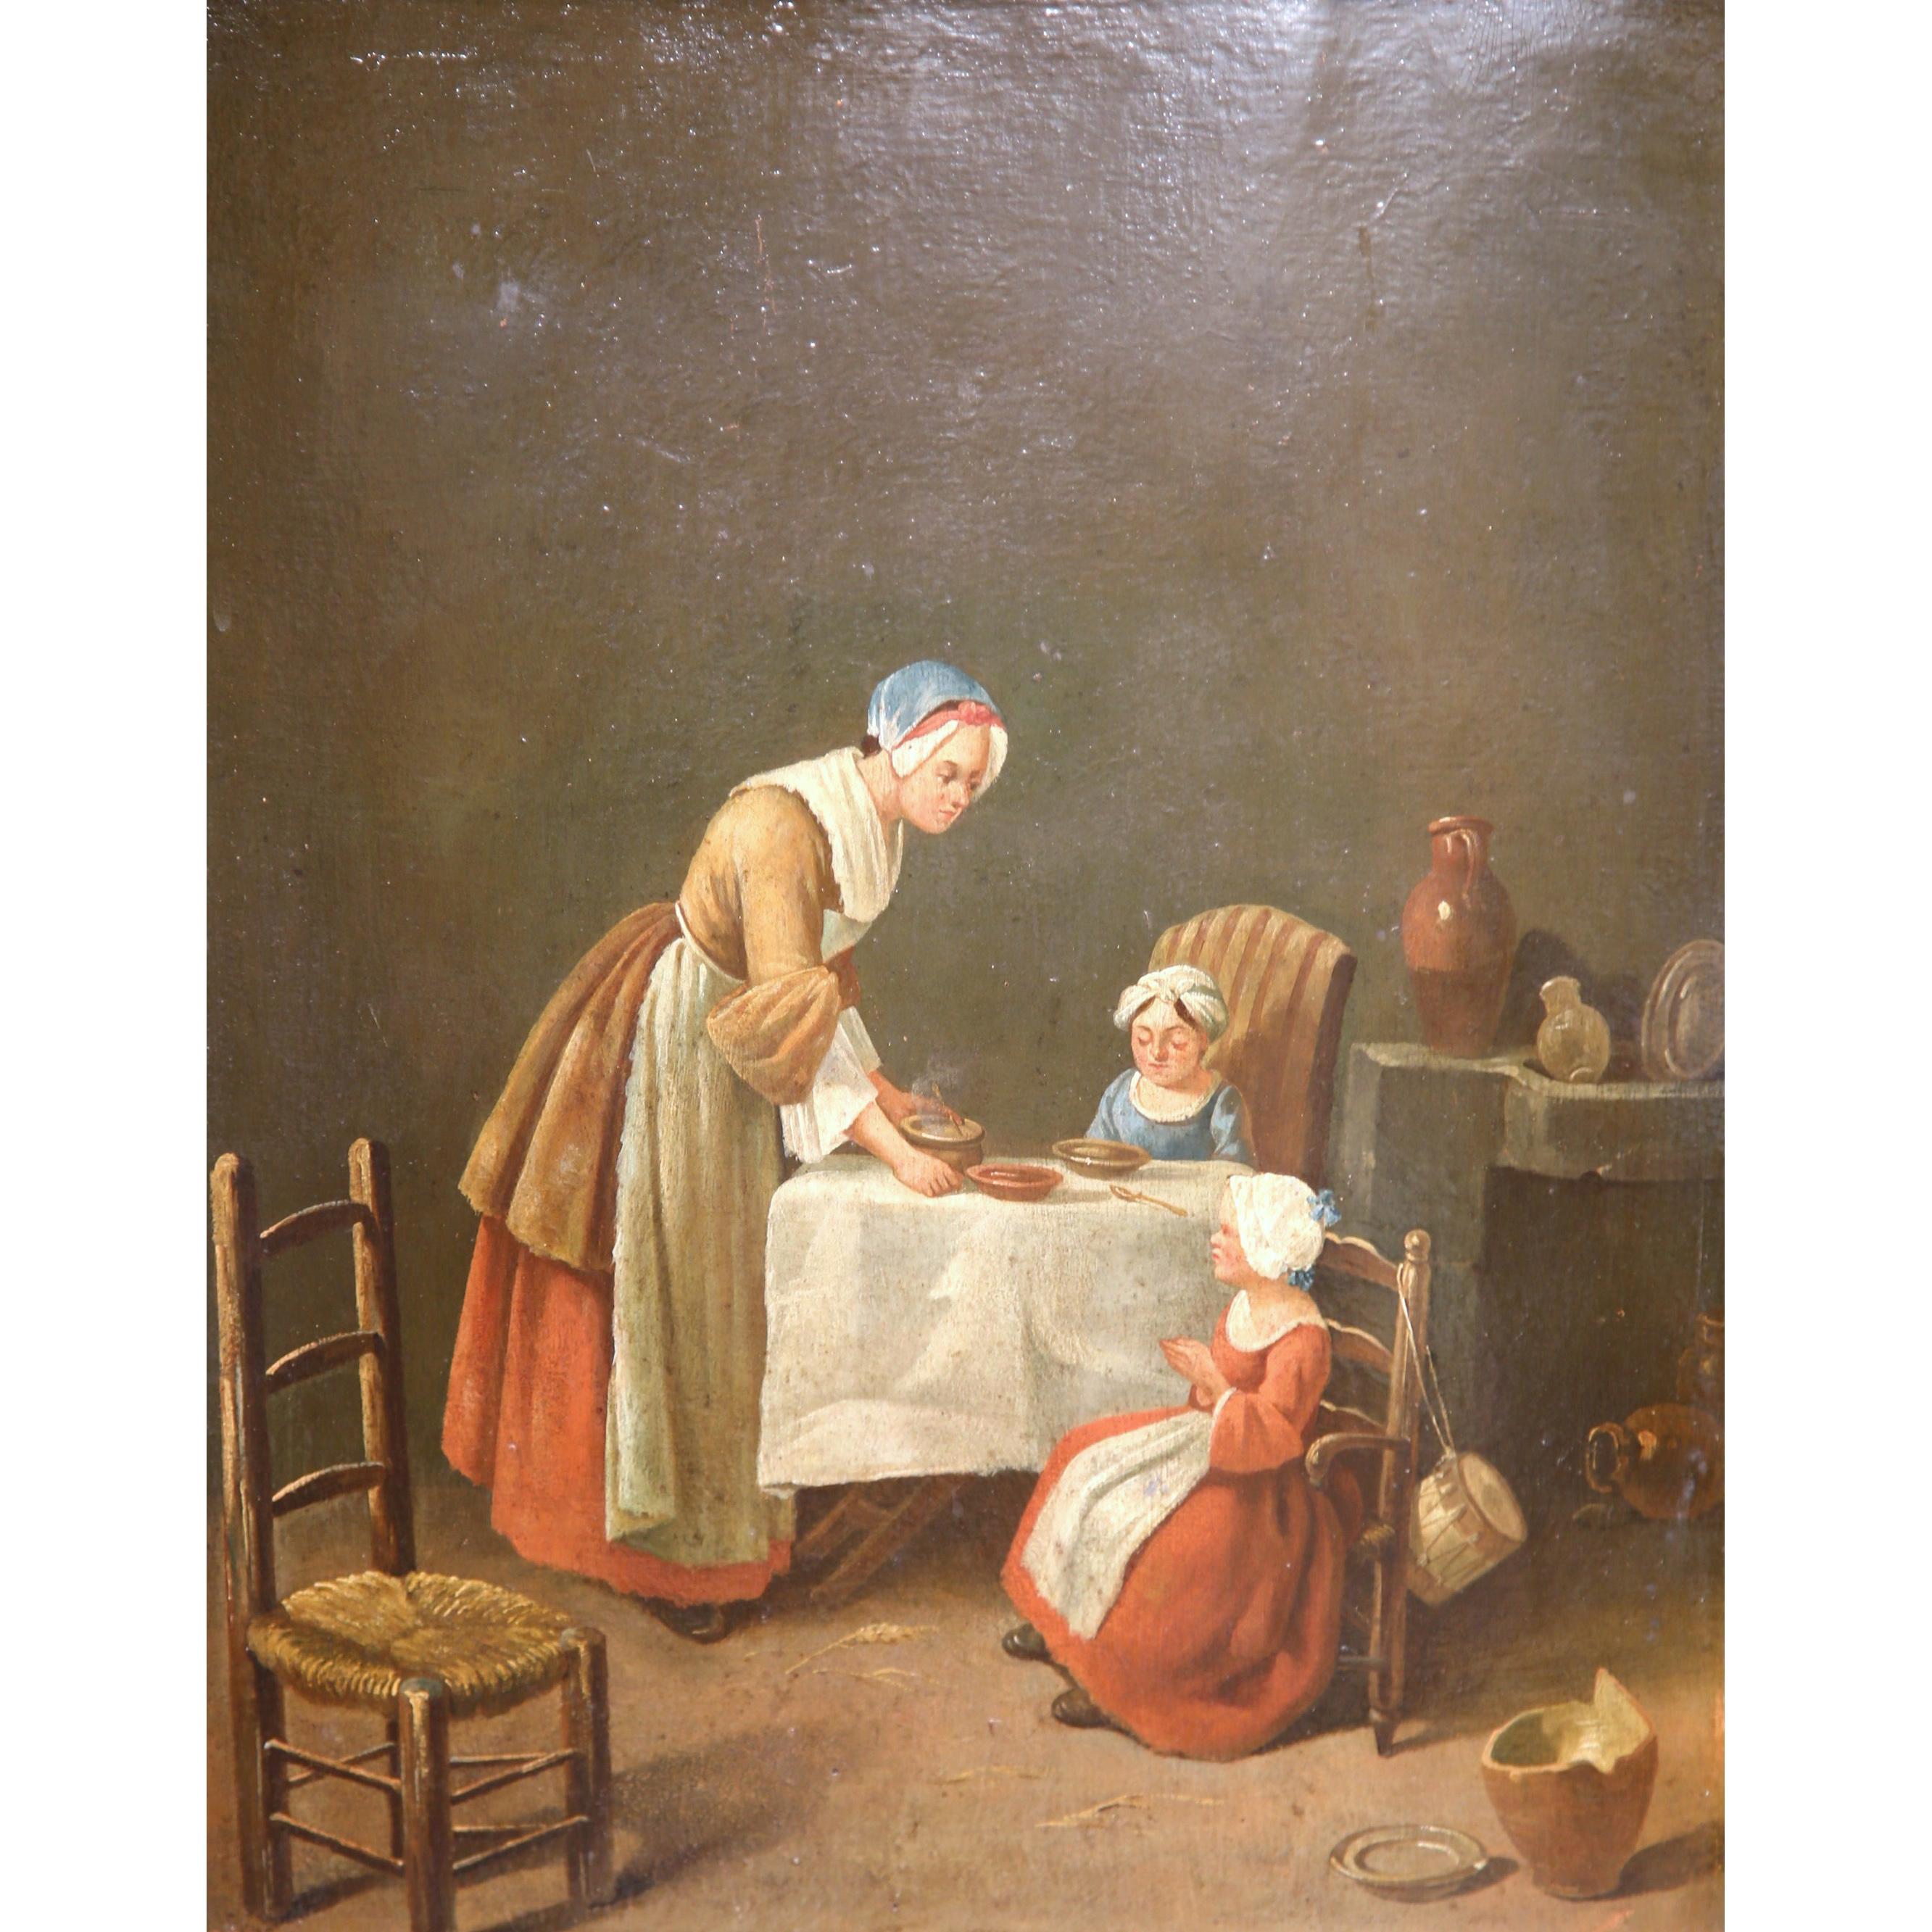 This beautiful antique oil on board painting was created in France circa 1830. Set inside its original gold leaf frame, the painting shows a humble peasant mother feeding breakfast to her two children after saying grace in the manner of Chardin. The